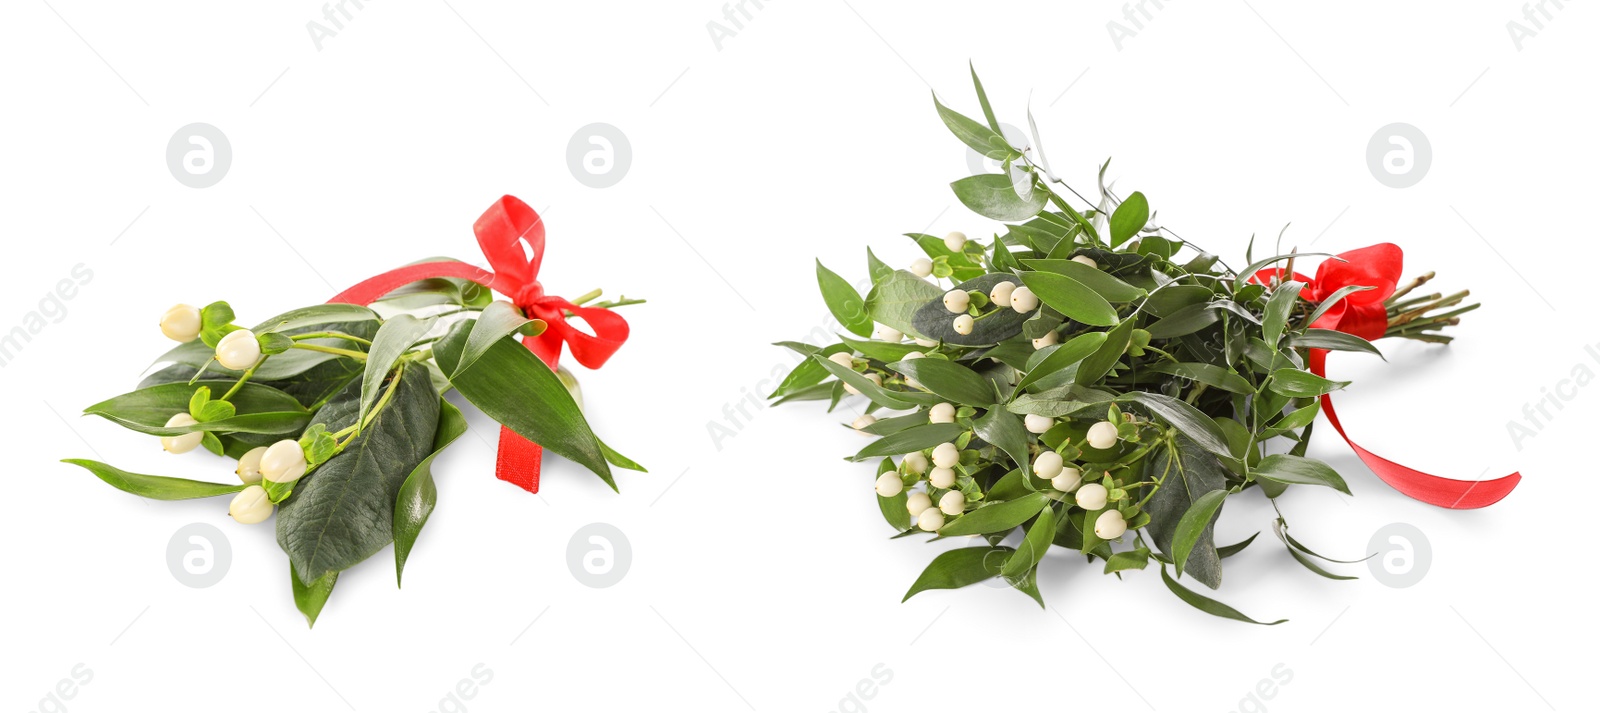 Image of Mistletoe bunches with red bows on white background. Traditional Christmas decor